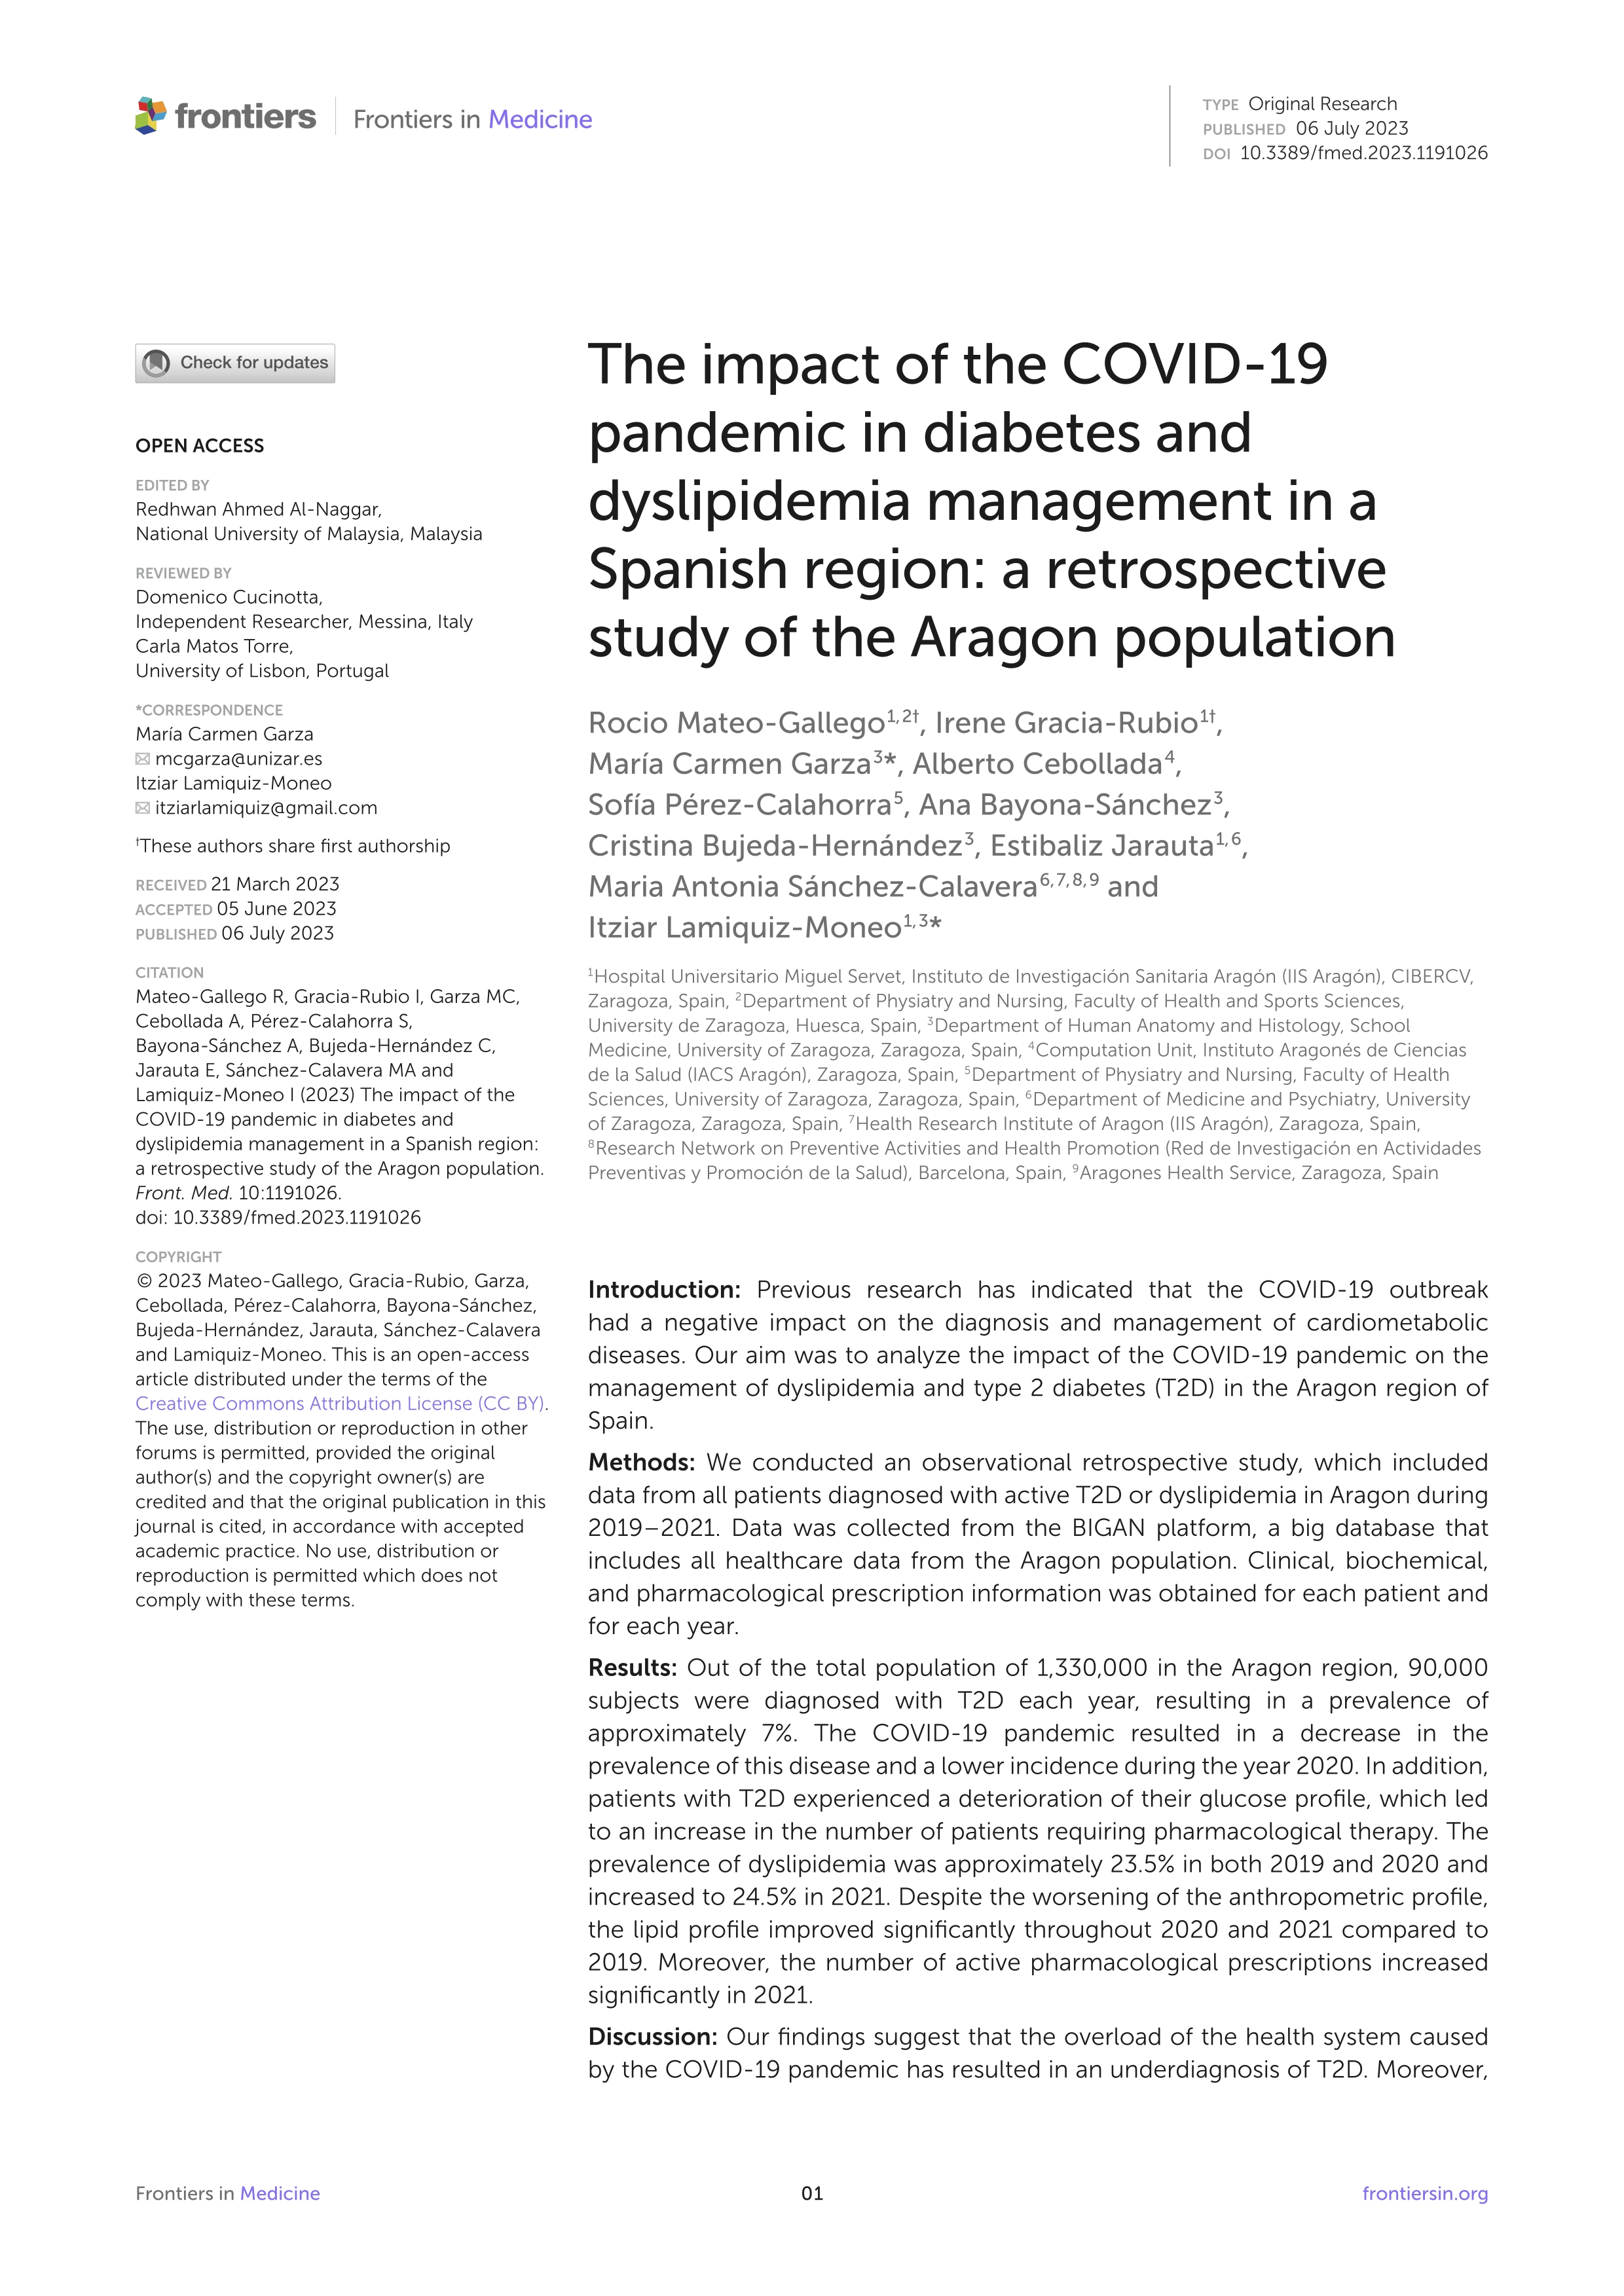 The impact of the COVID-19 pandemic in diabetes and dyslipidemia management in a Spanish region: a retrospective study of the Aragon population